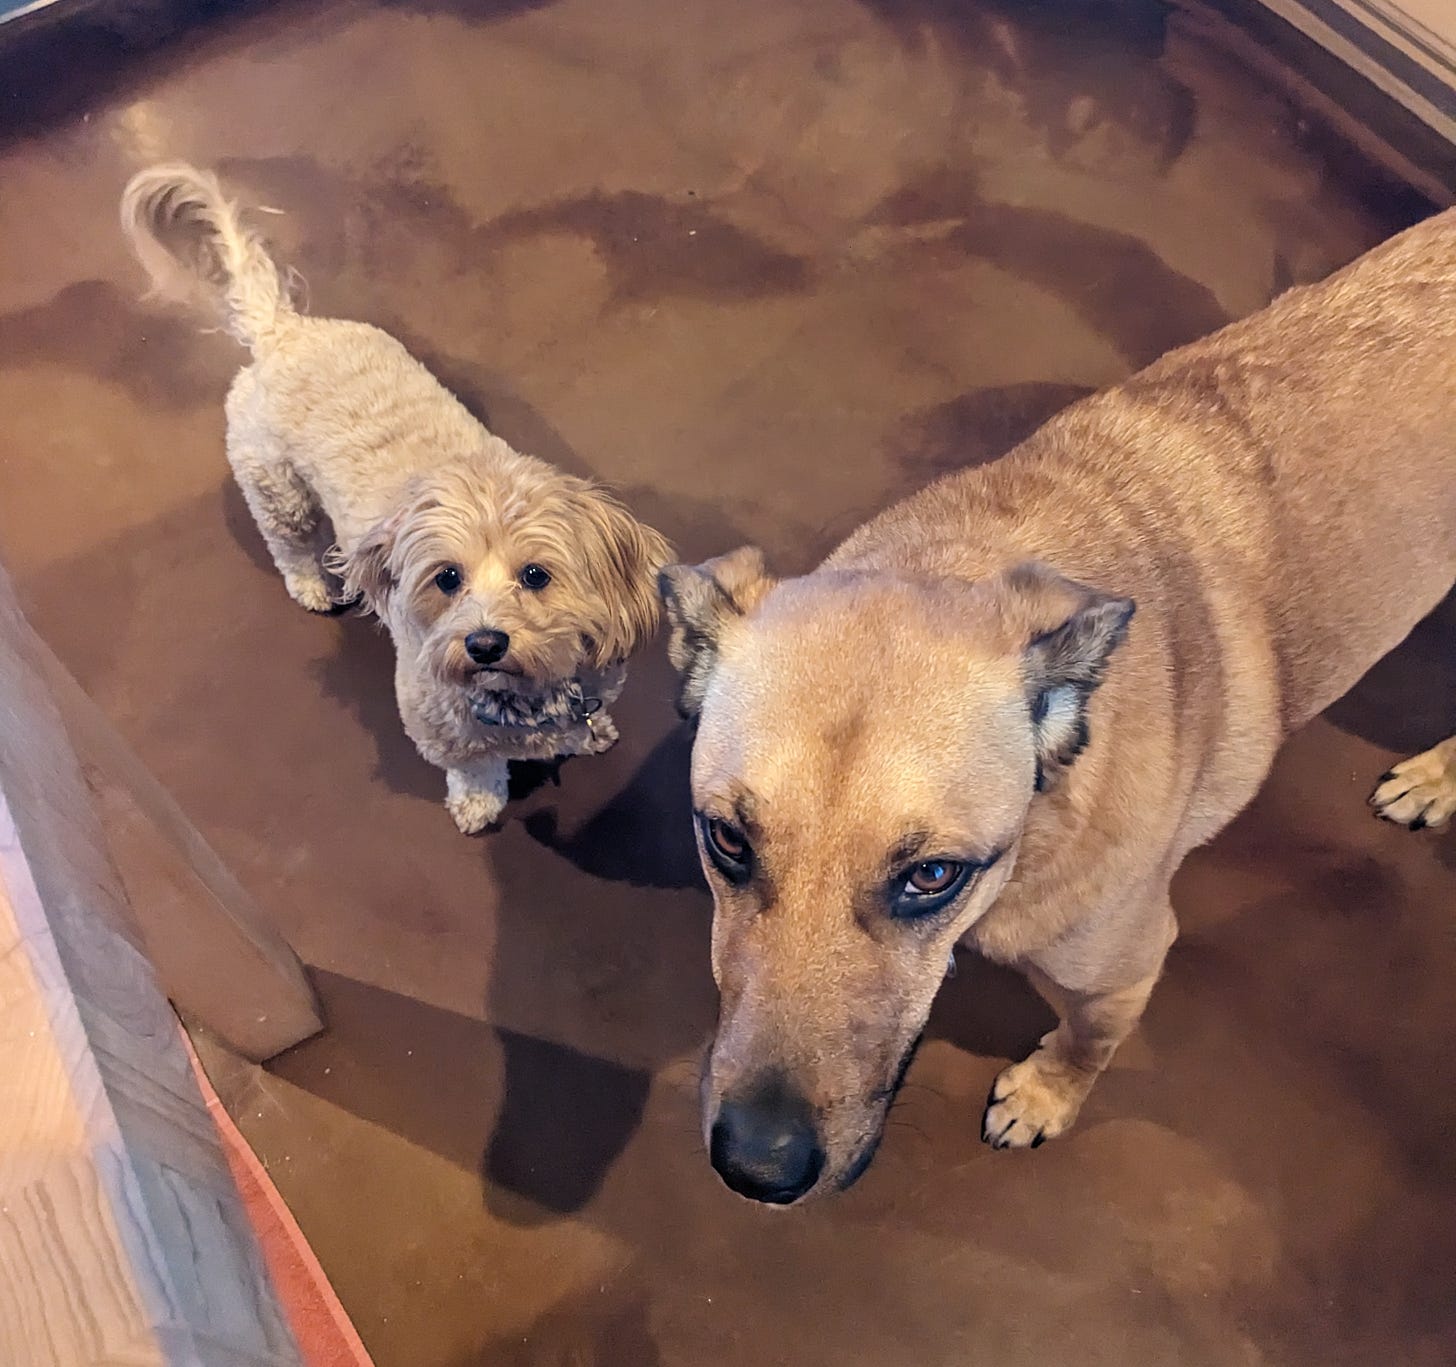 My mom's dog (12-pound Lhasa-poo) and my dog (45-pound mutt) giving side-eye while waiting for treats.